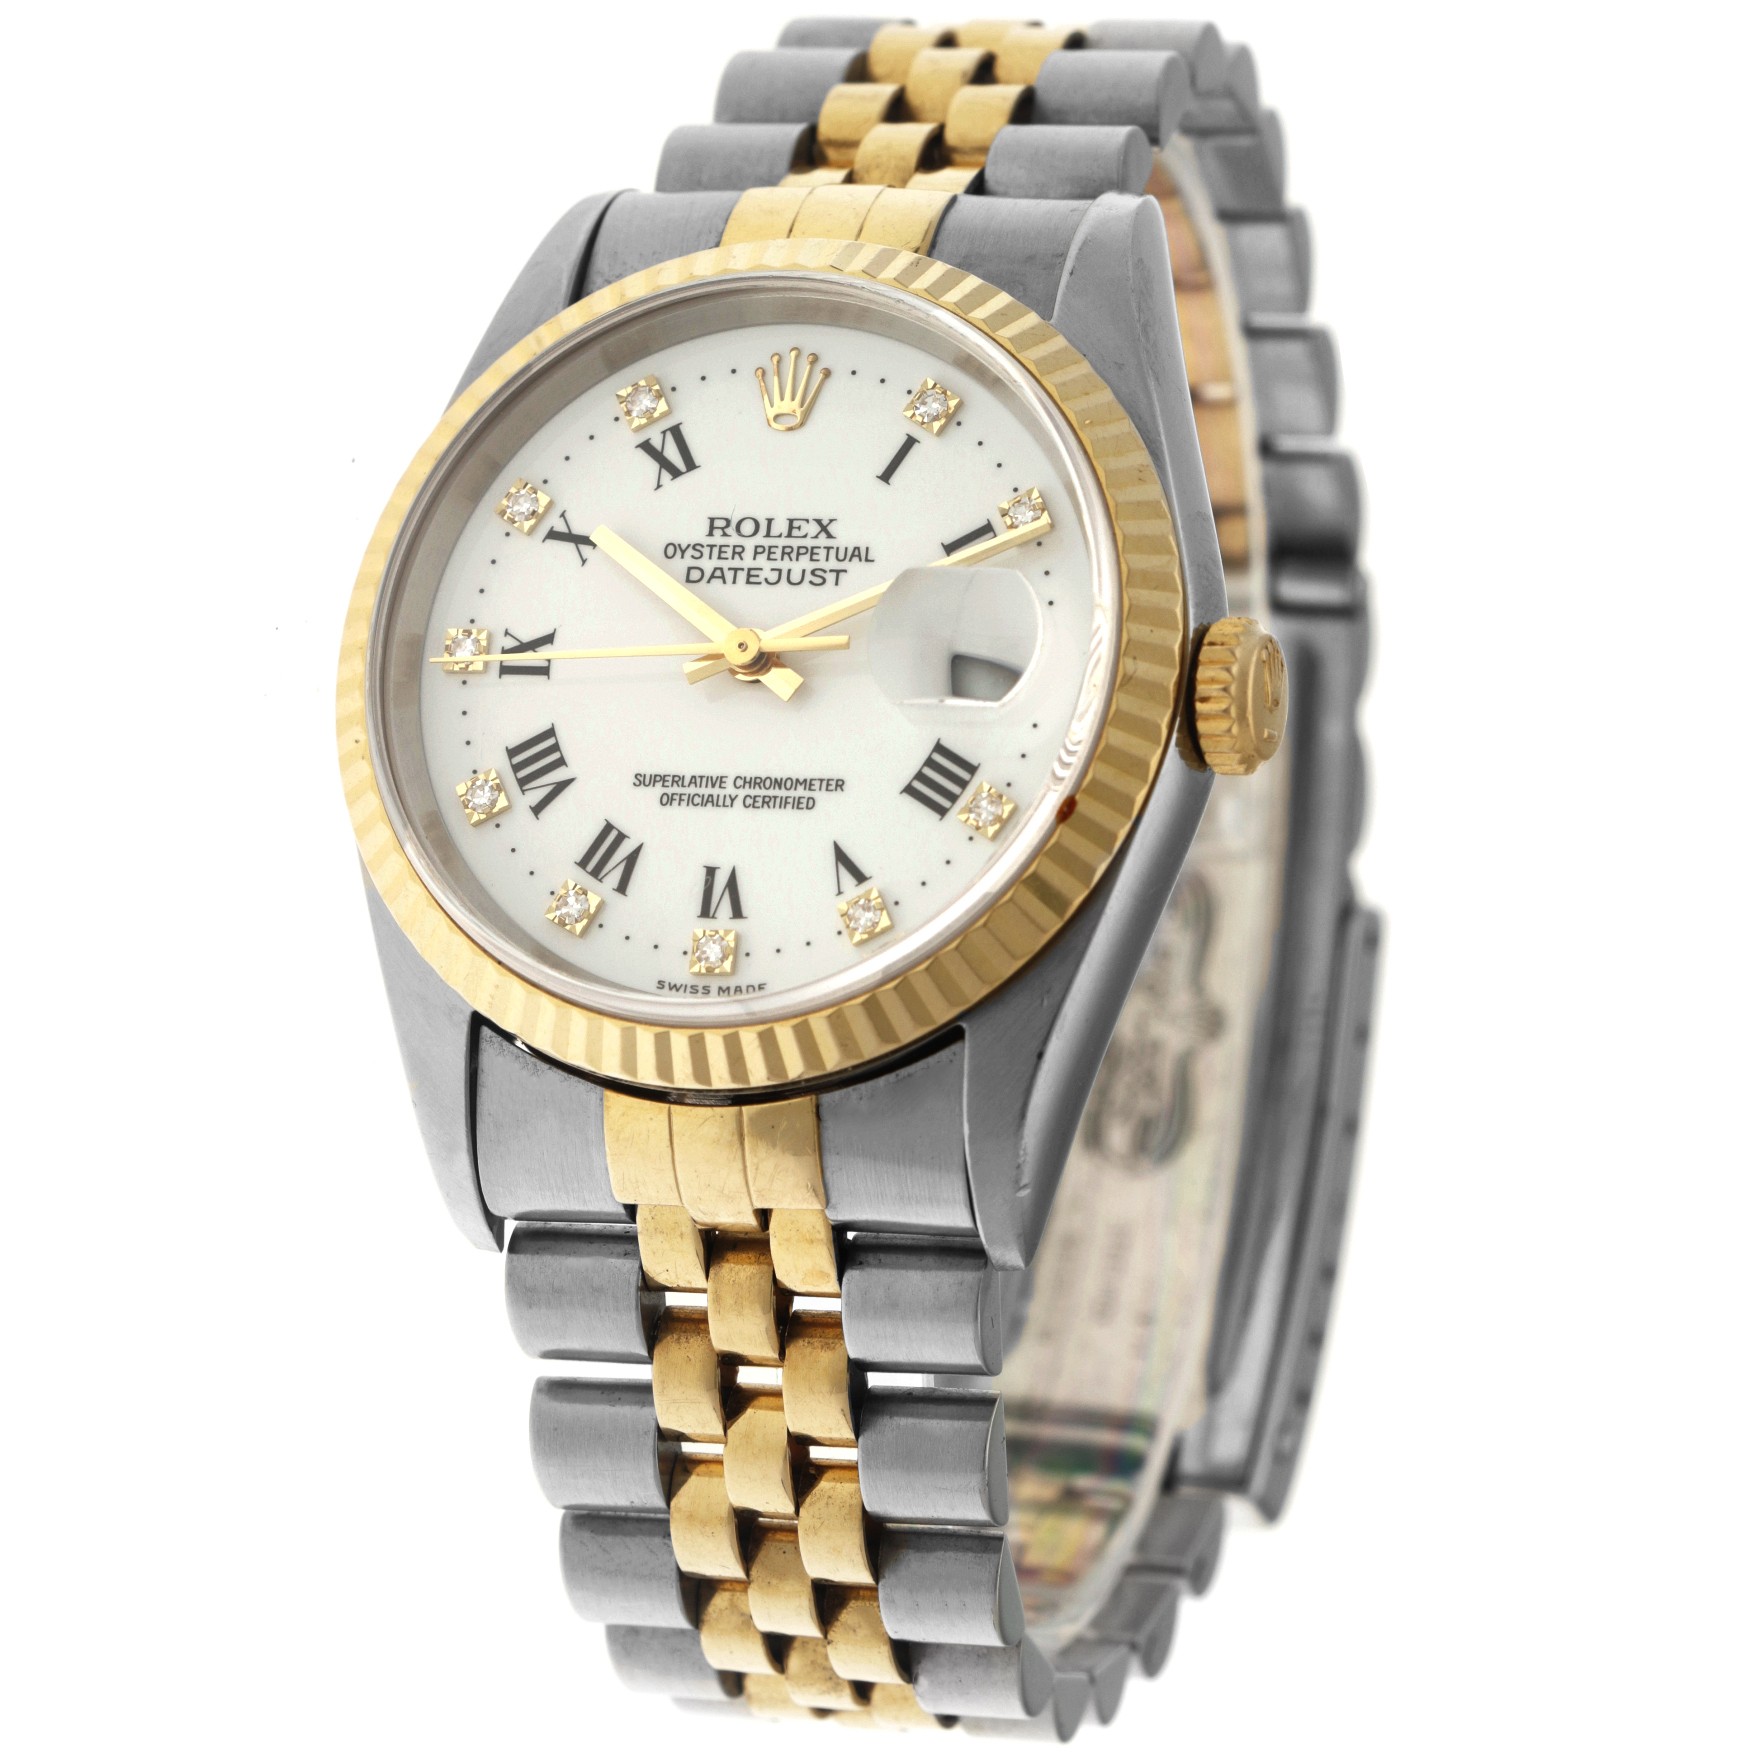 No Reserve - Rolex Datejust 36 'Diamond Buckley Dial' 16233 - Men's watch - approx. 1996. - Image 2 of 5